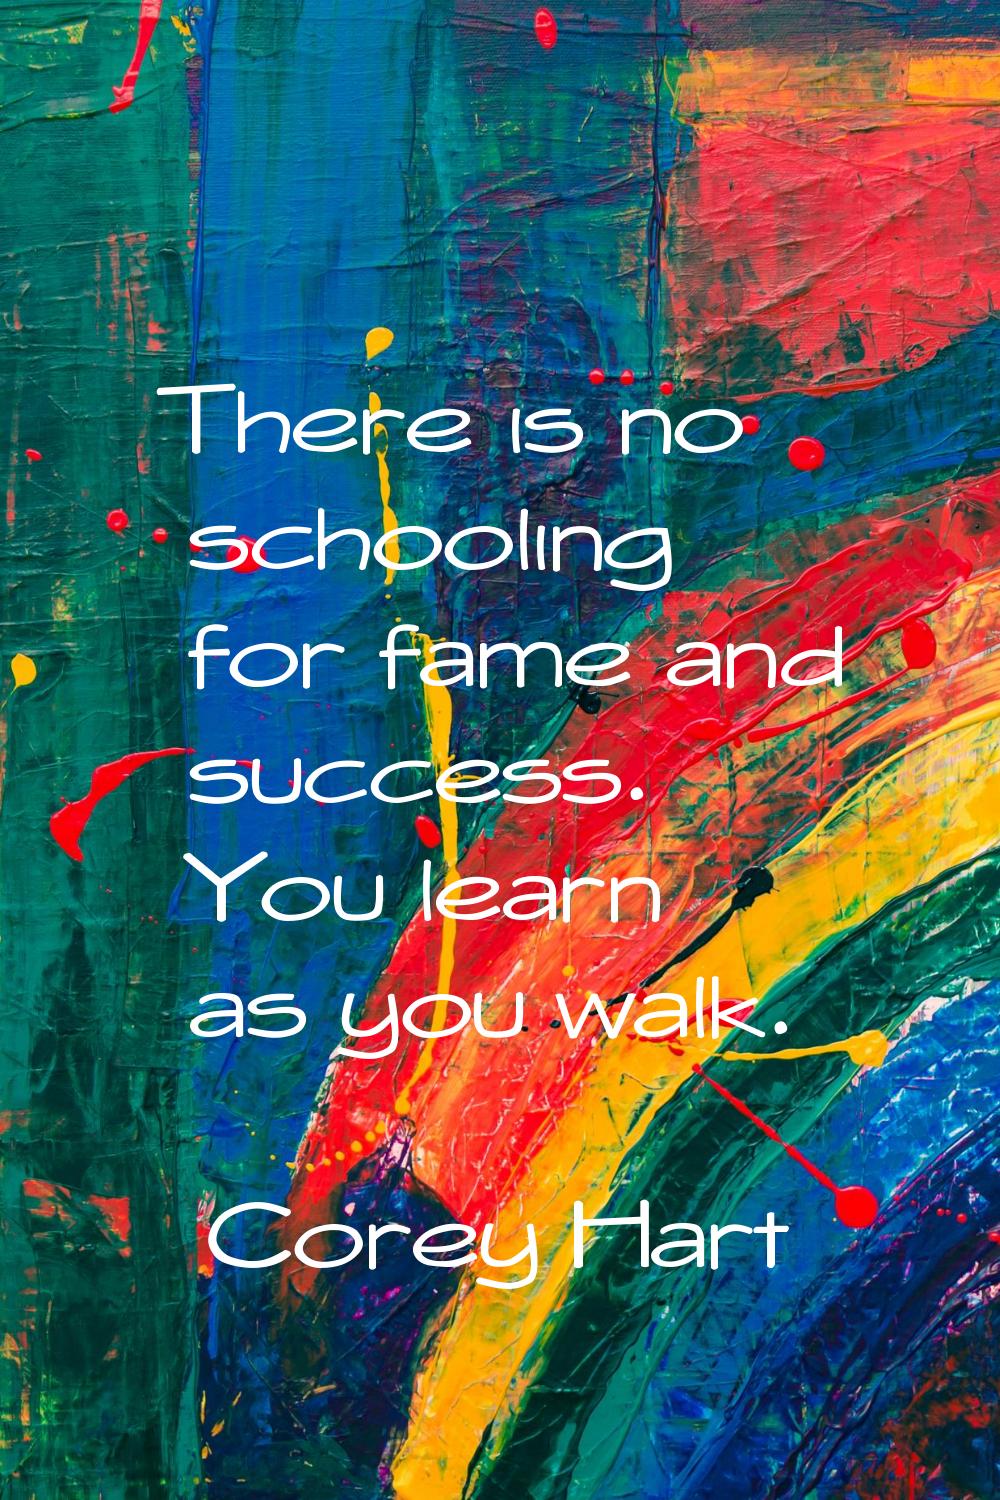 There is no schooling for fame and success. You learn as you walk.